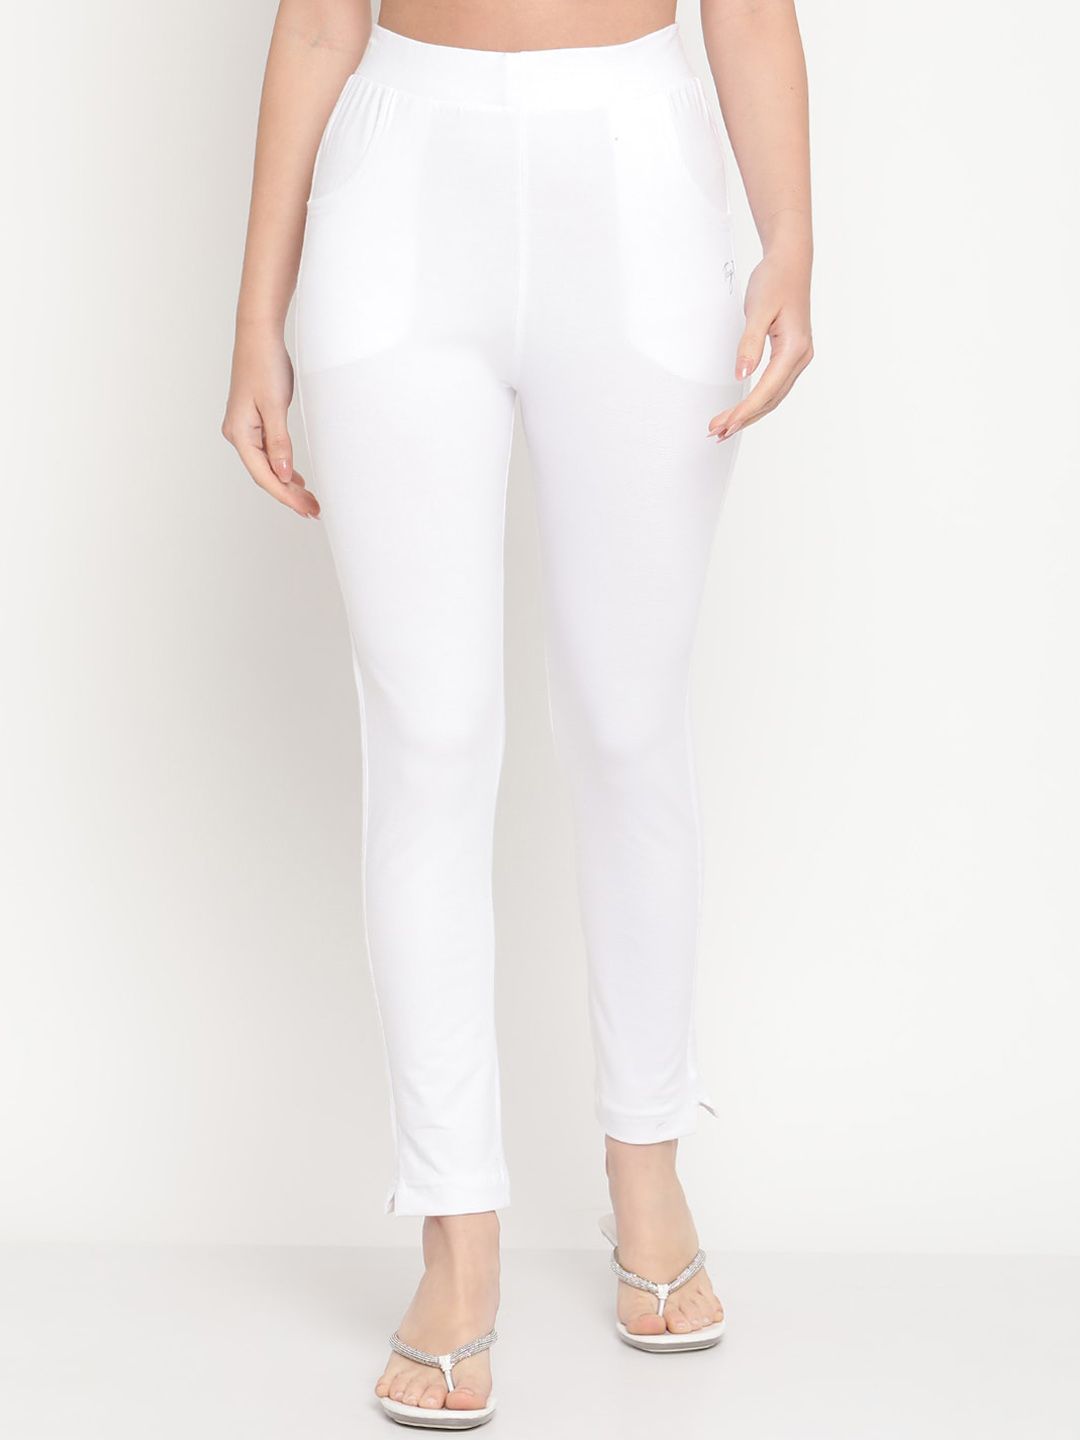 TAG 7 Women White Solid Ankle Length Leggings Price in India